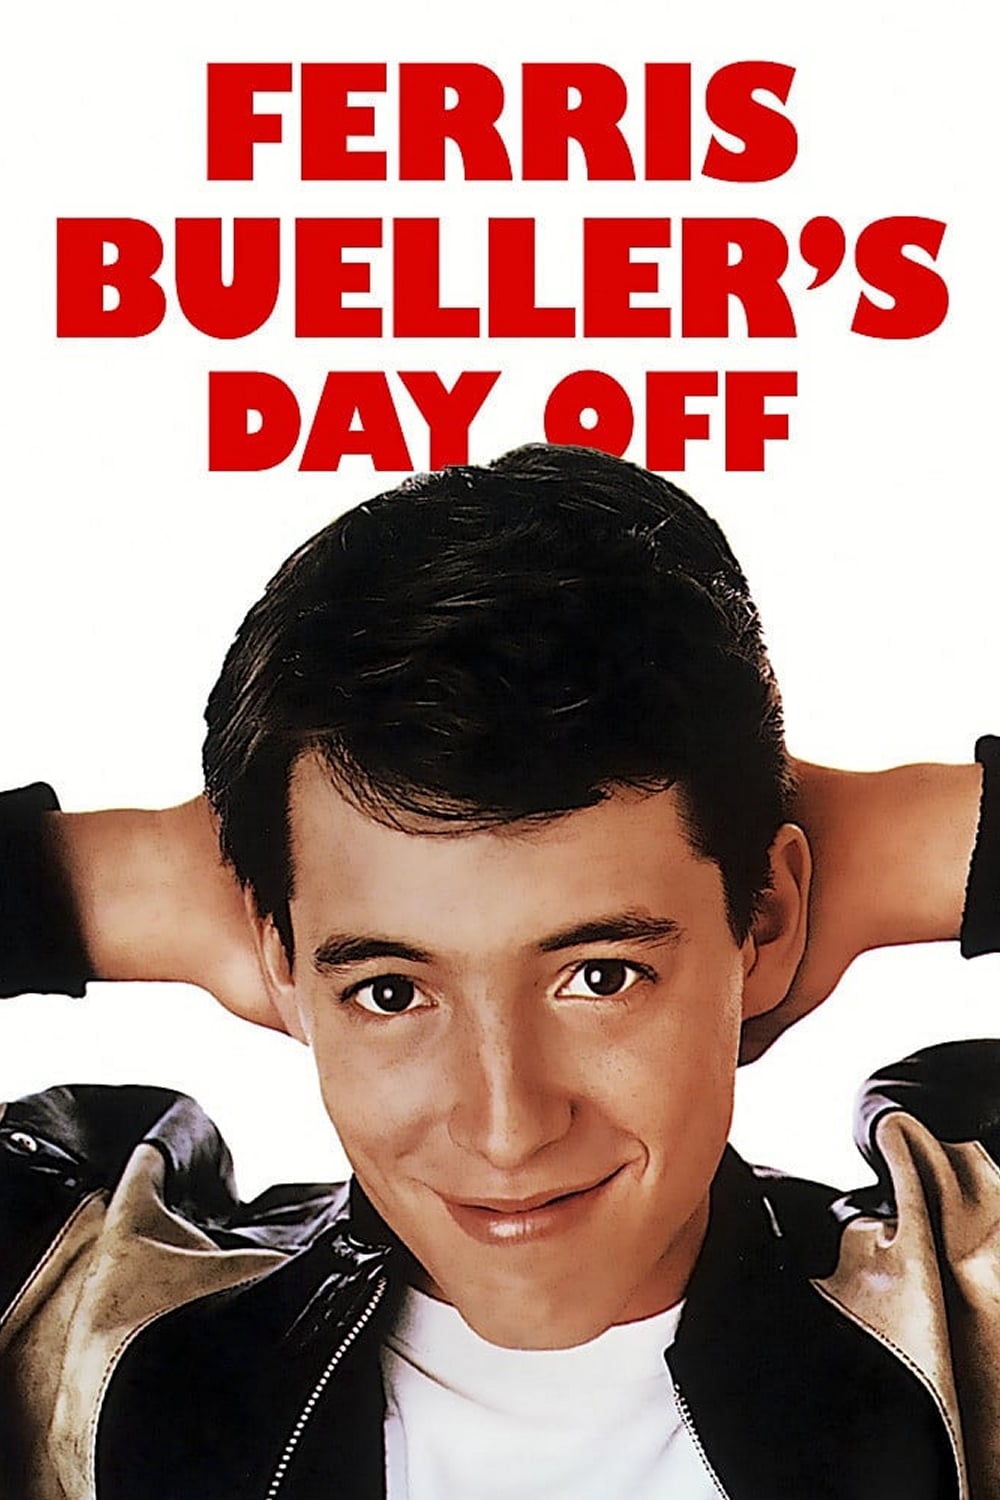 FERRIS BUELLERS DAY OFF